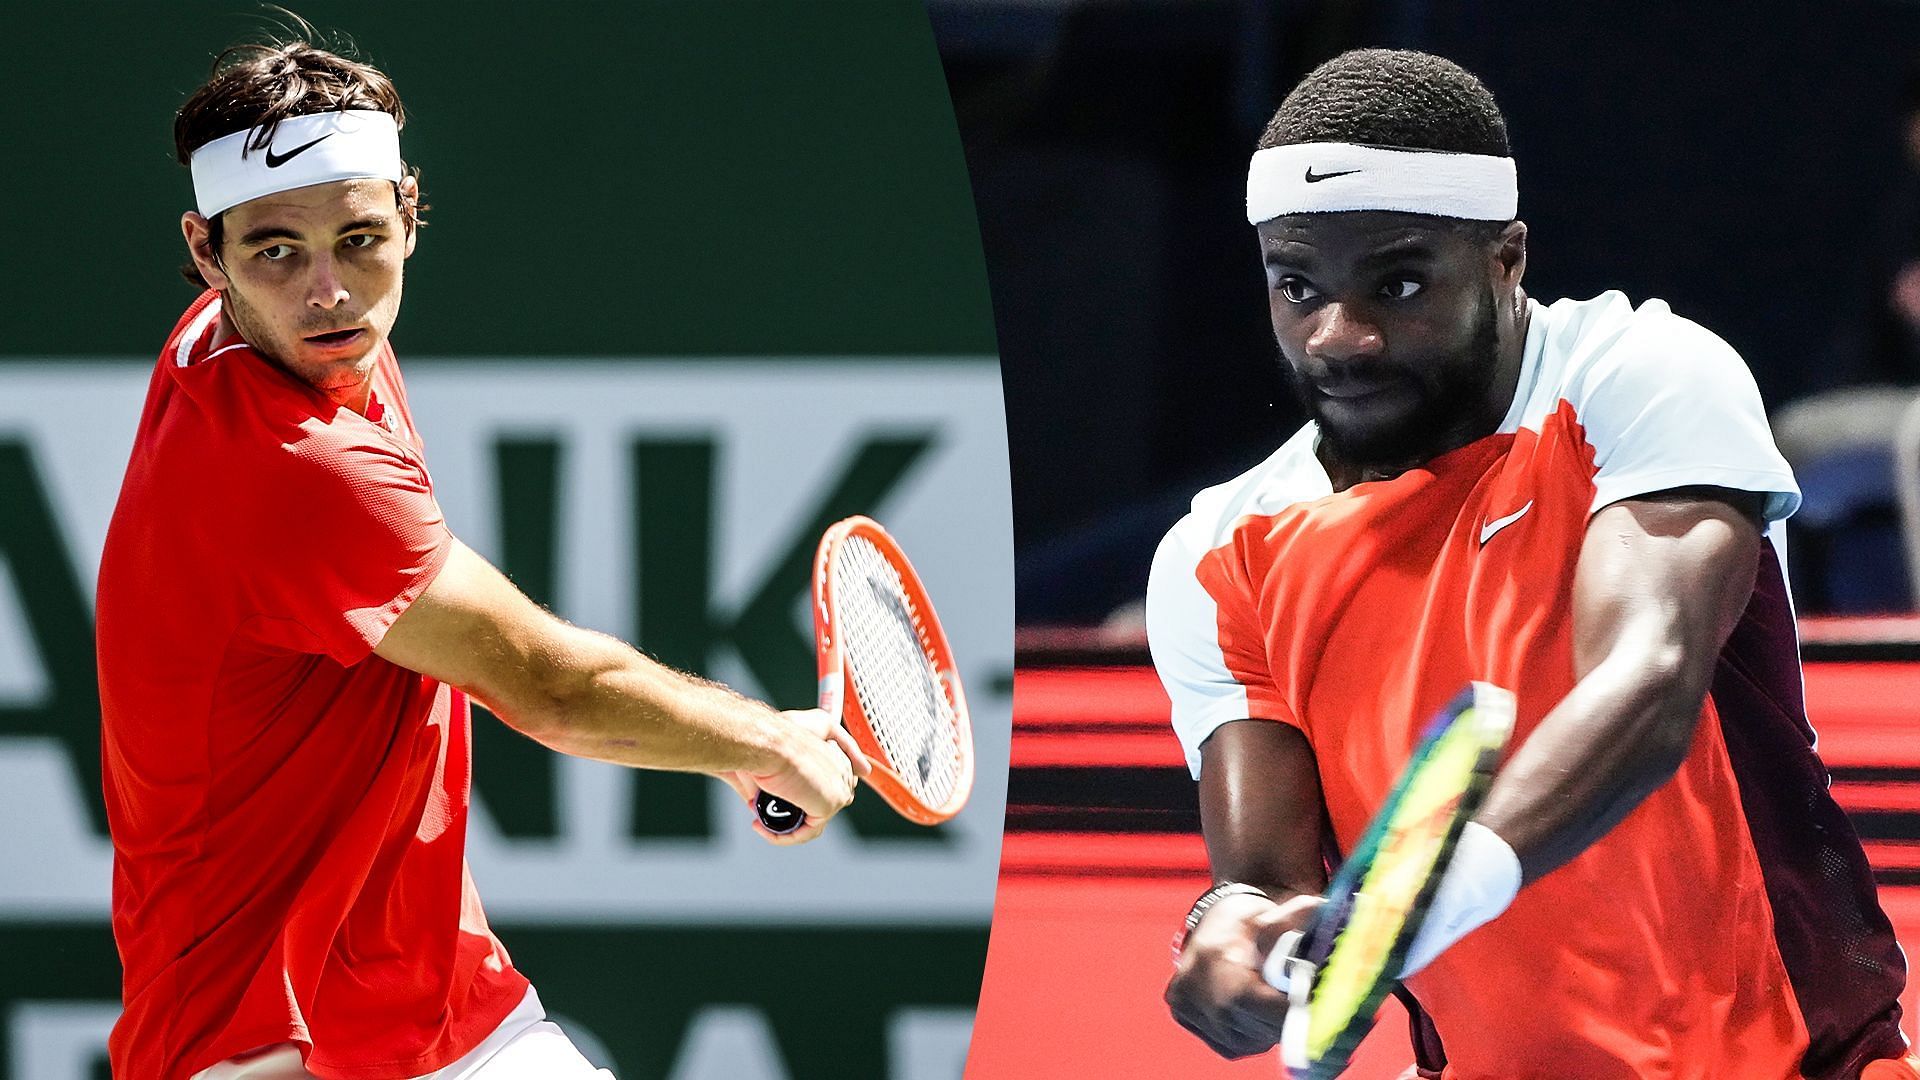 Japan Open 2022 final Taylor Fritz vs Frances Tiafoe preview, head-to-head, prediction, odds and pick